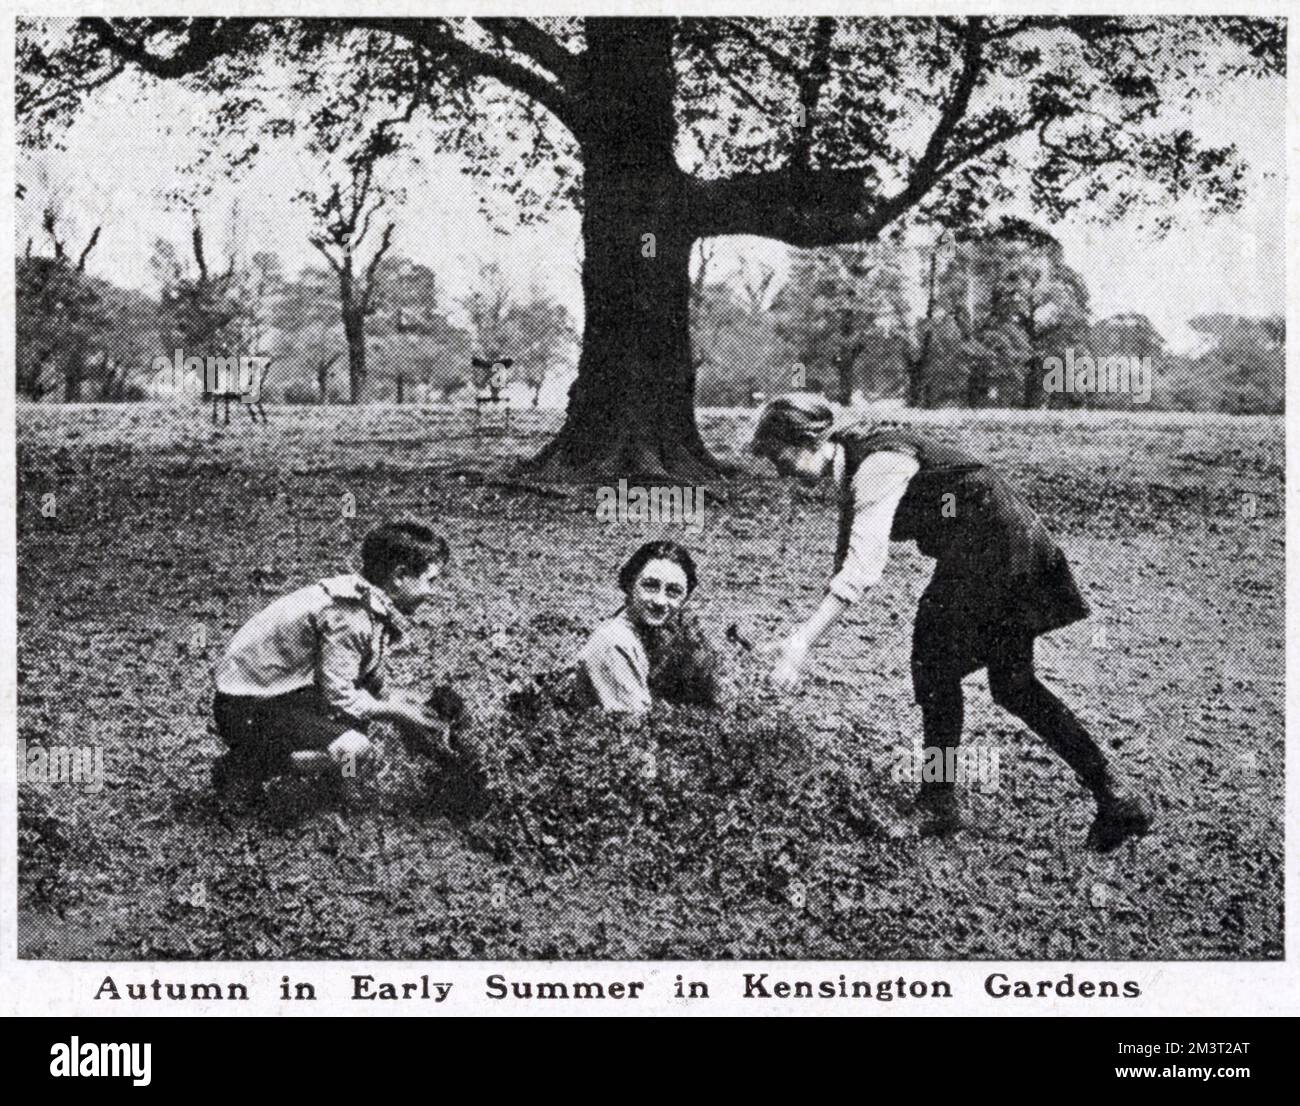 Girls in Kensington Gardens playing among dried leaves fallen from the trees during a period of hot weather and prolonged drought in the summer of 1921.      Date: July 1921 Stock Photo